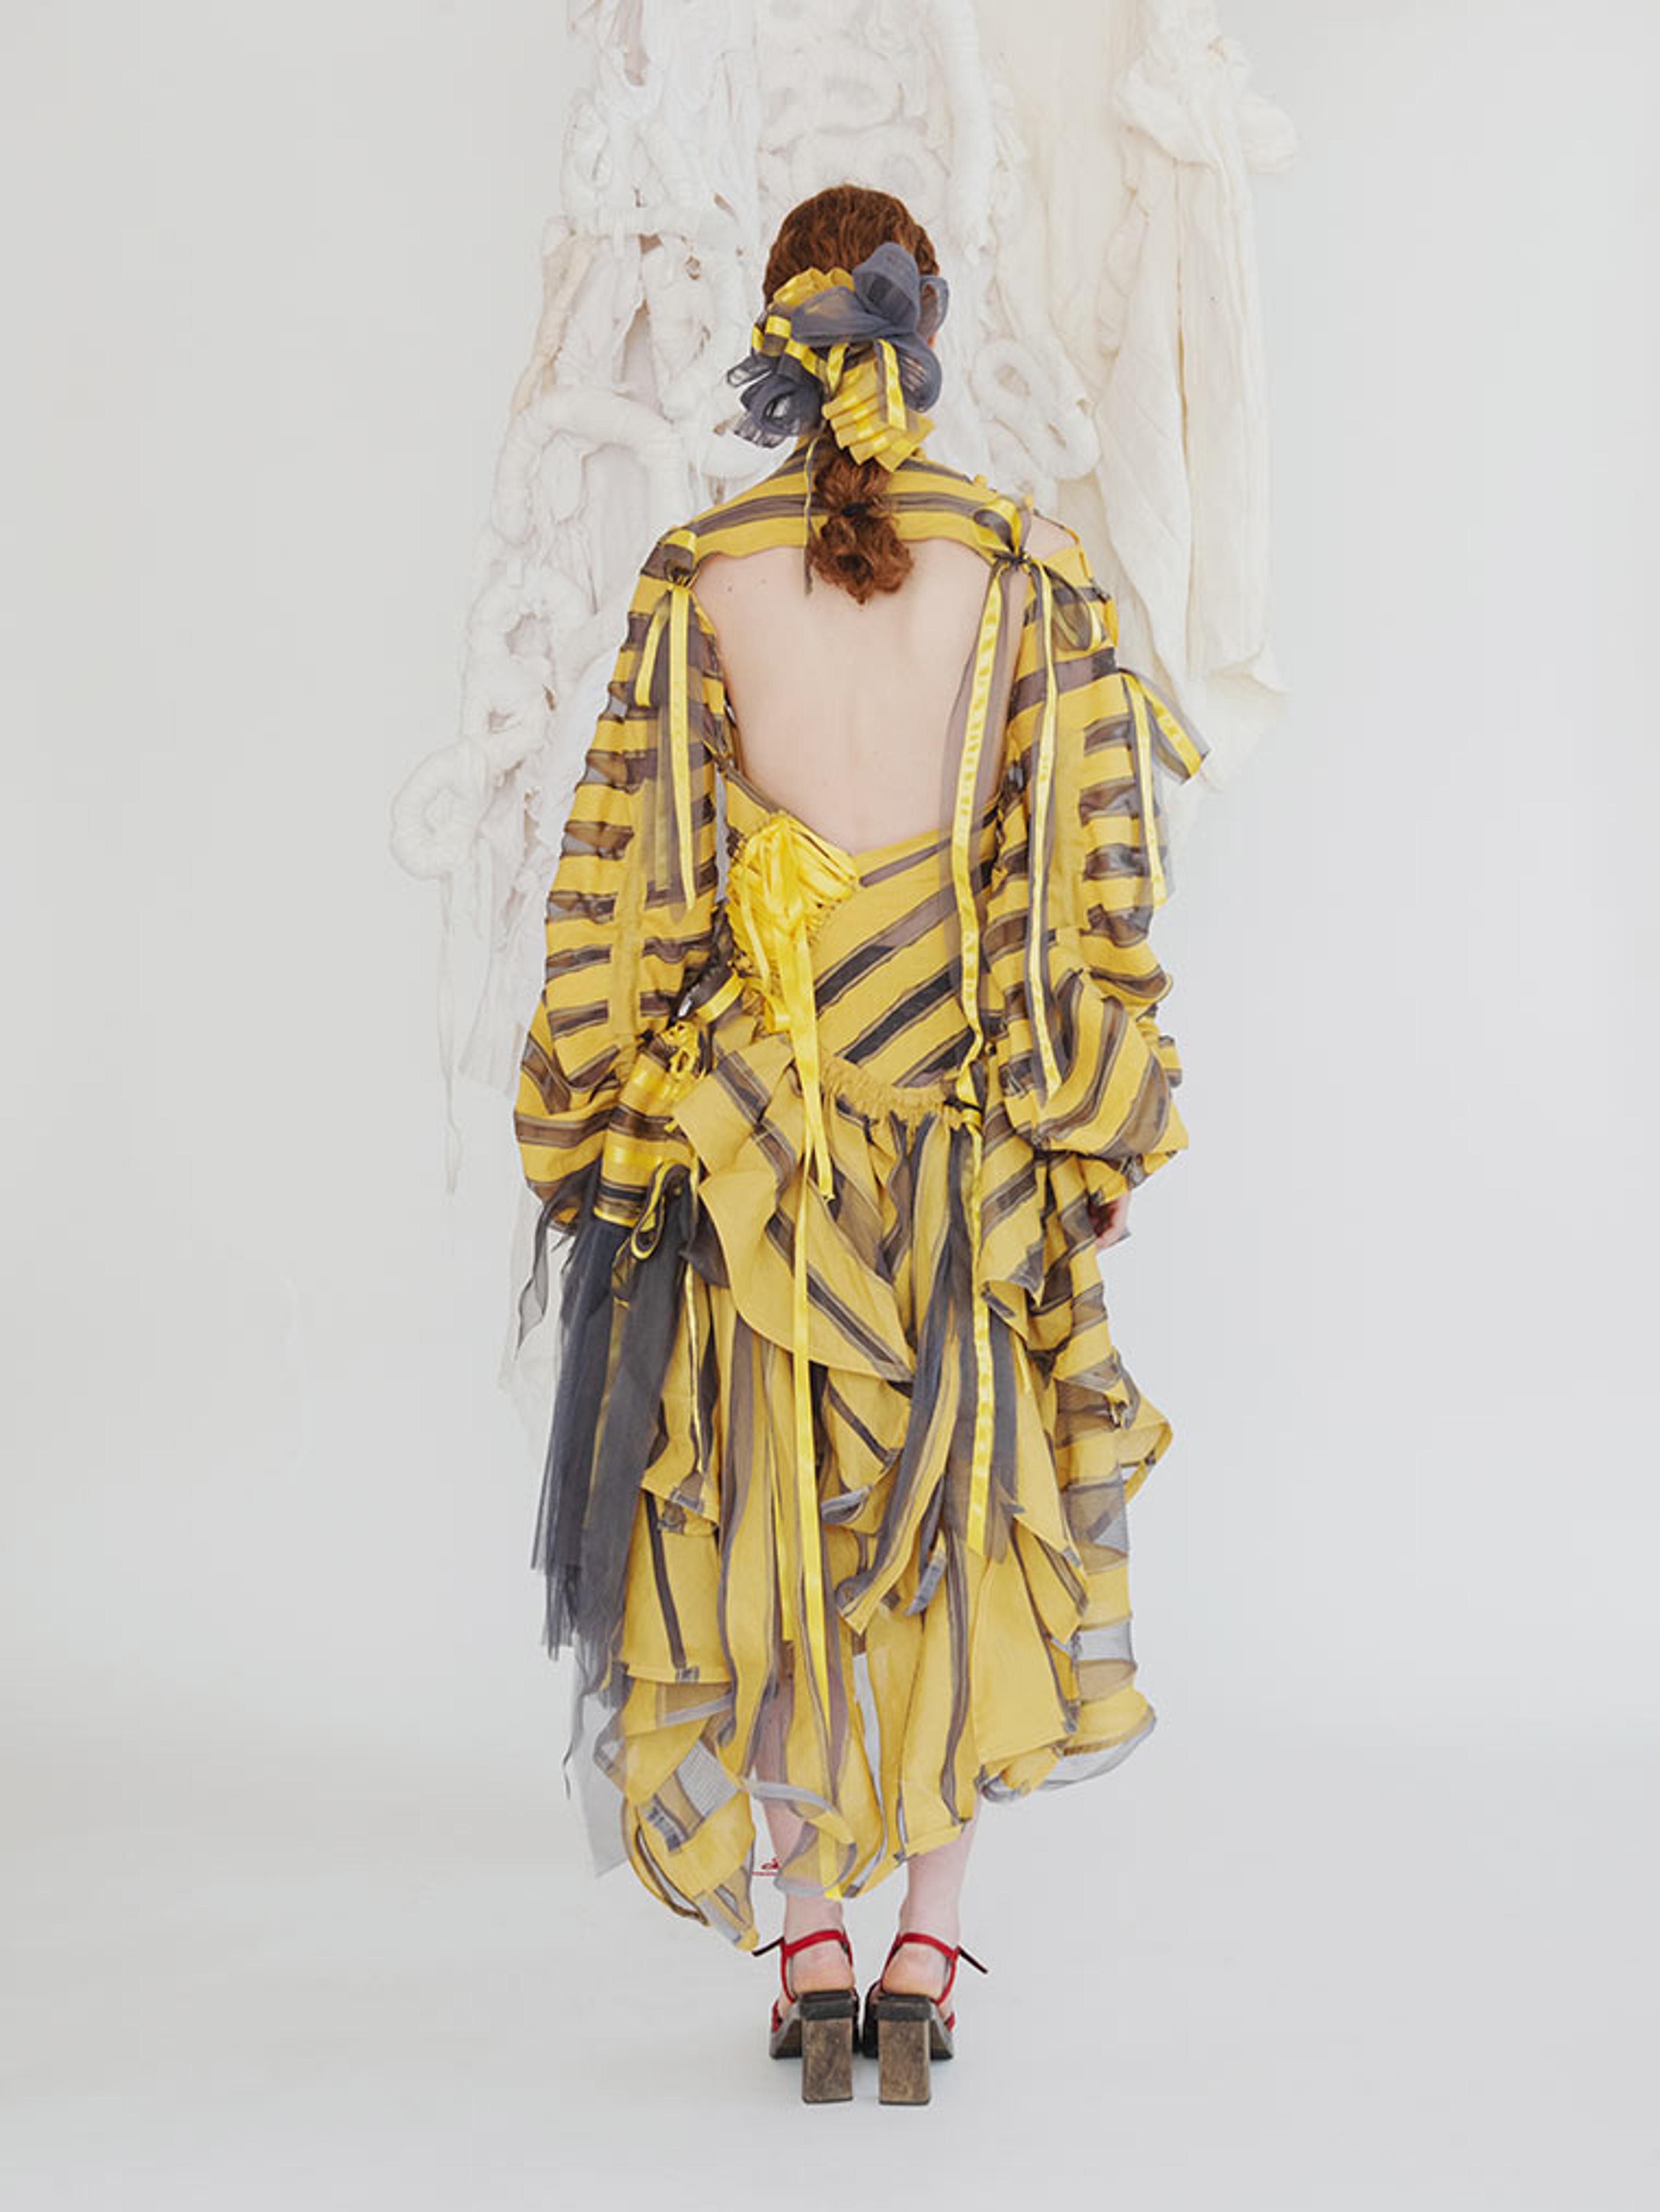 Aurora Wilkinson's yellow and black striped dress seen from the back